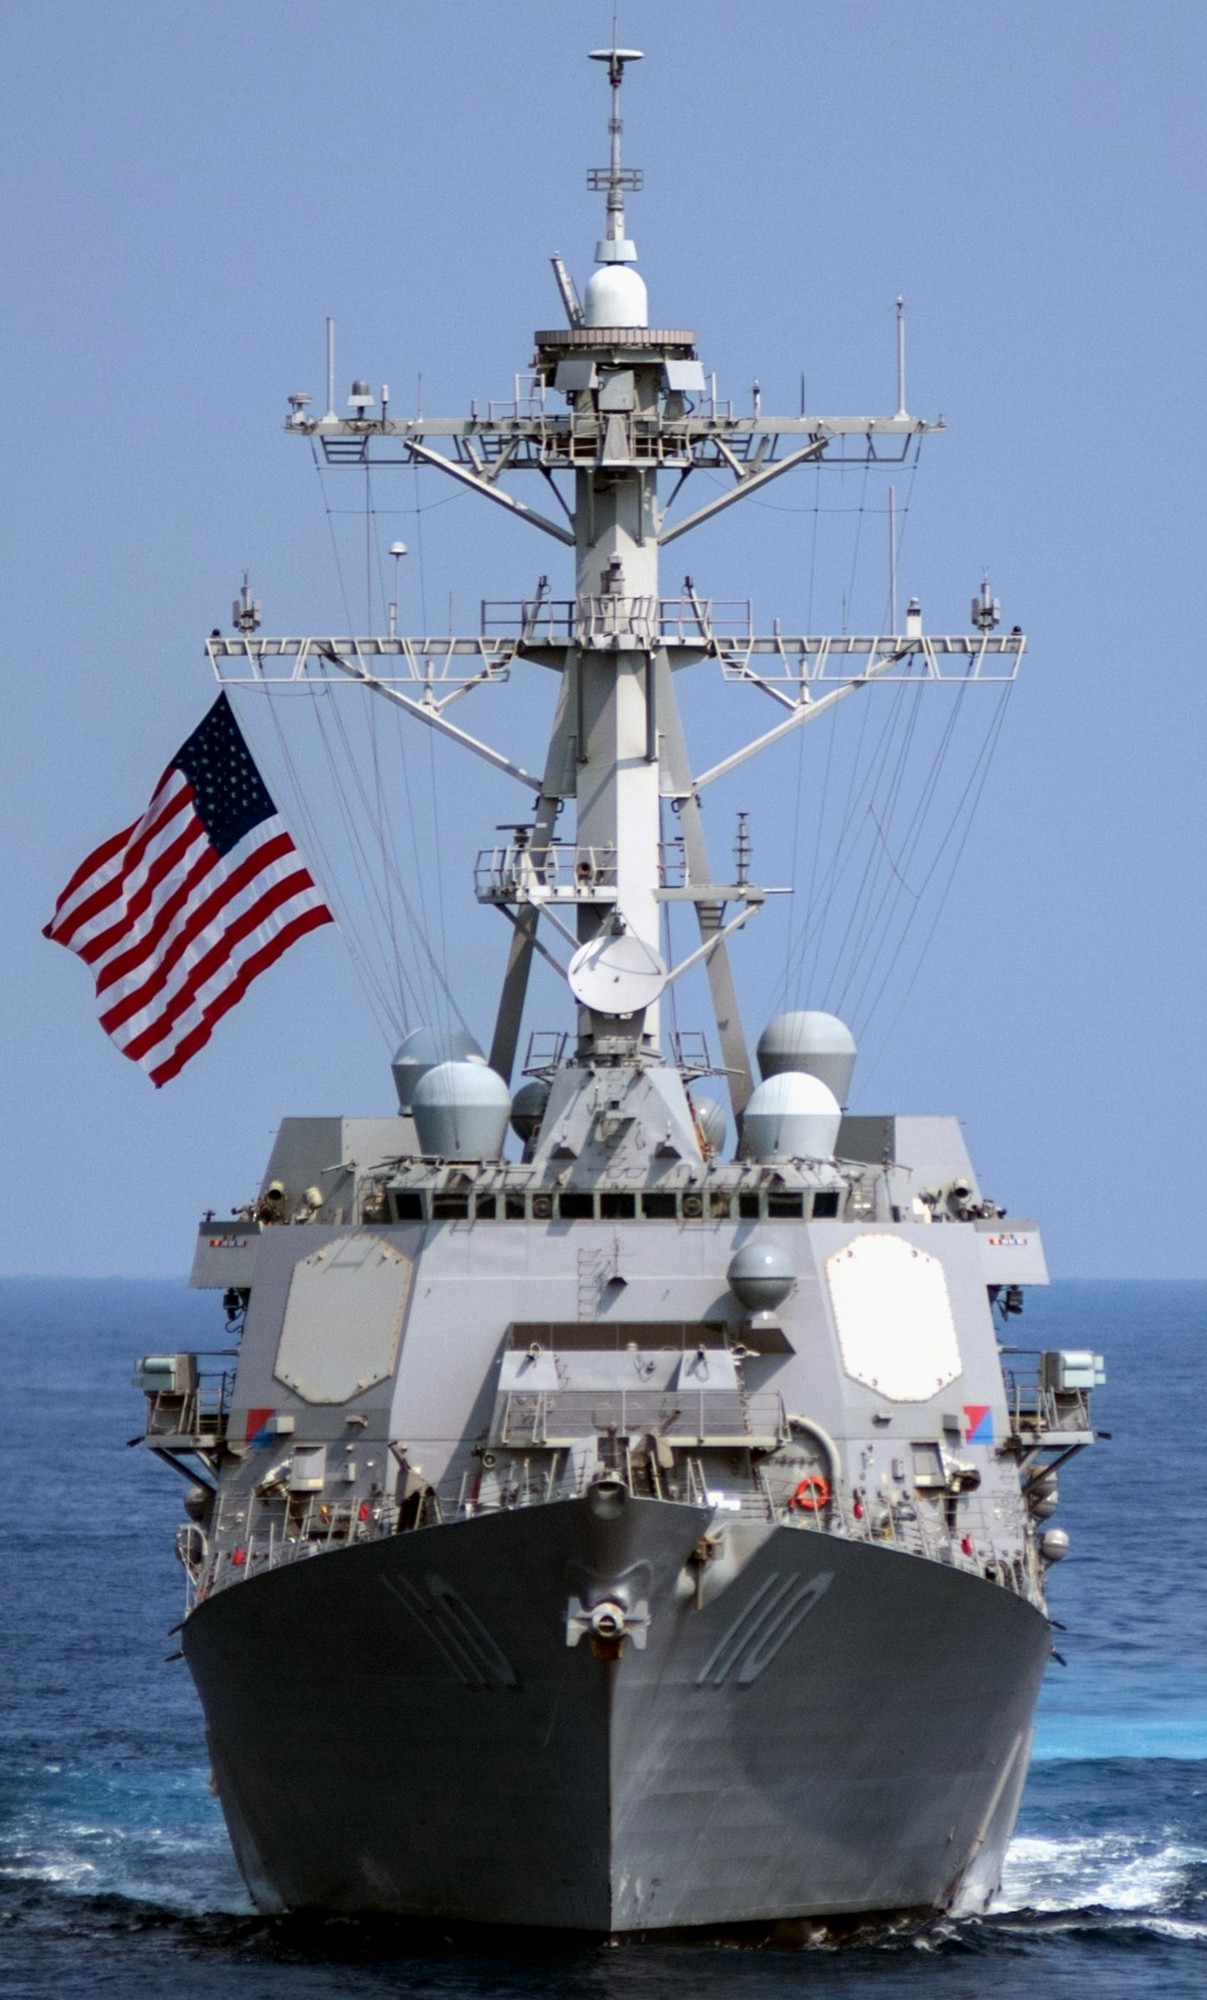 ddg-110 uss william p. lawrence arleigh burke class guided missile destroyer aegis us navy 19